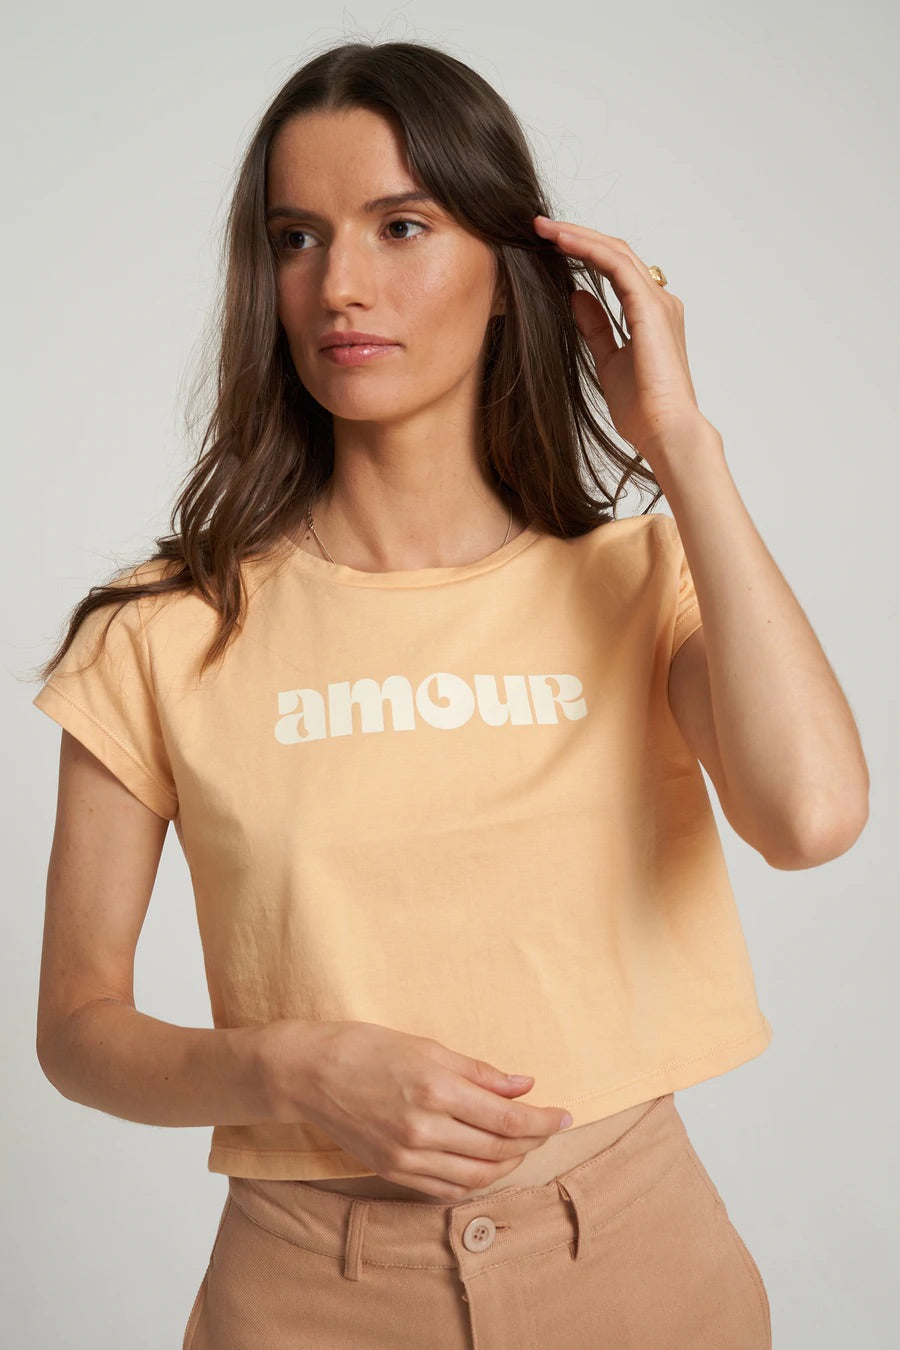 Amour Tee - Mimosa with Creme